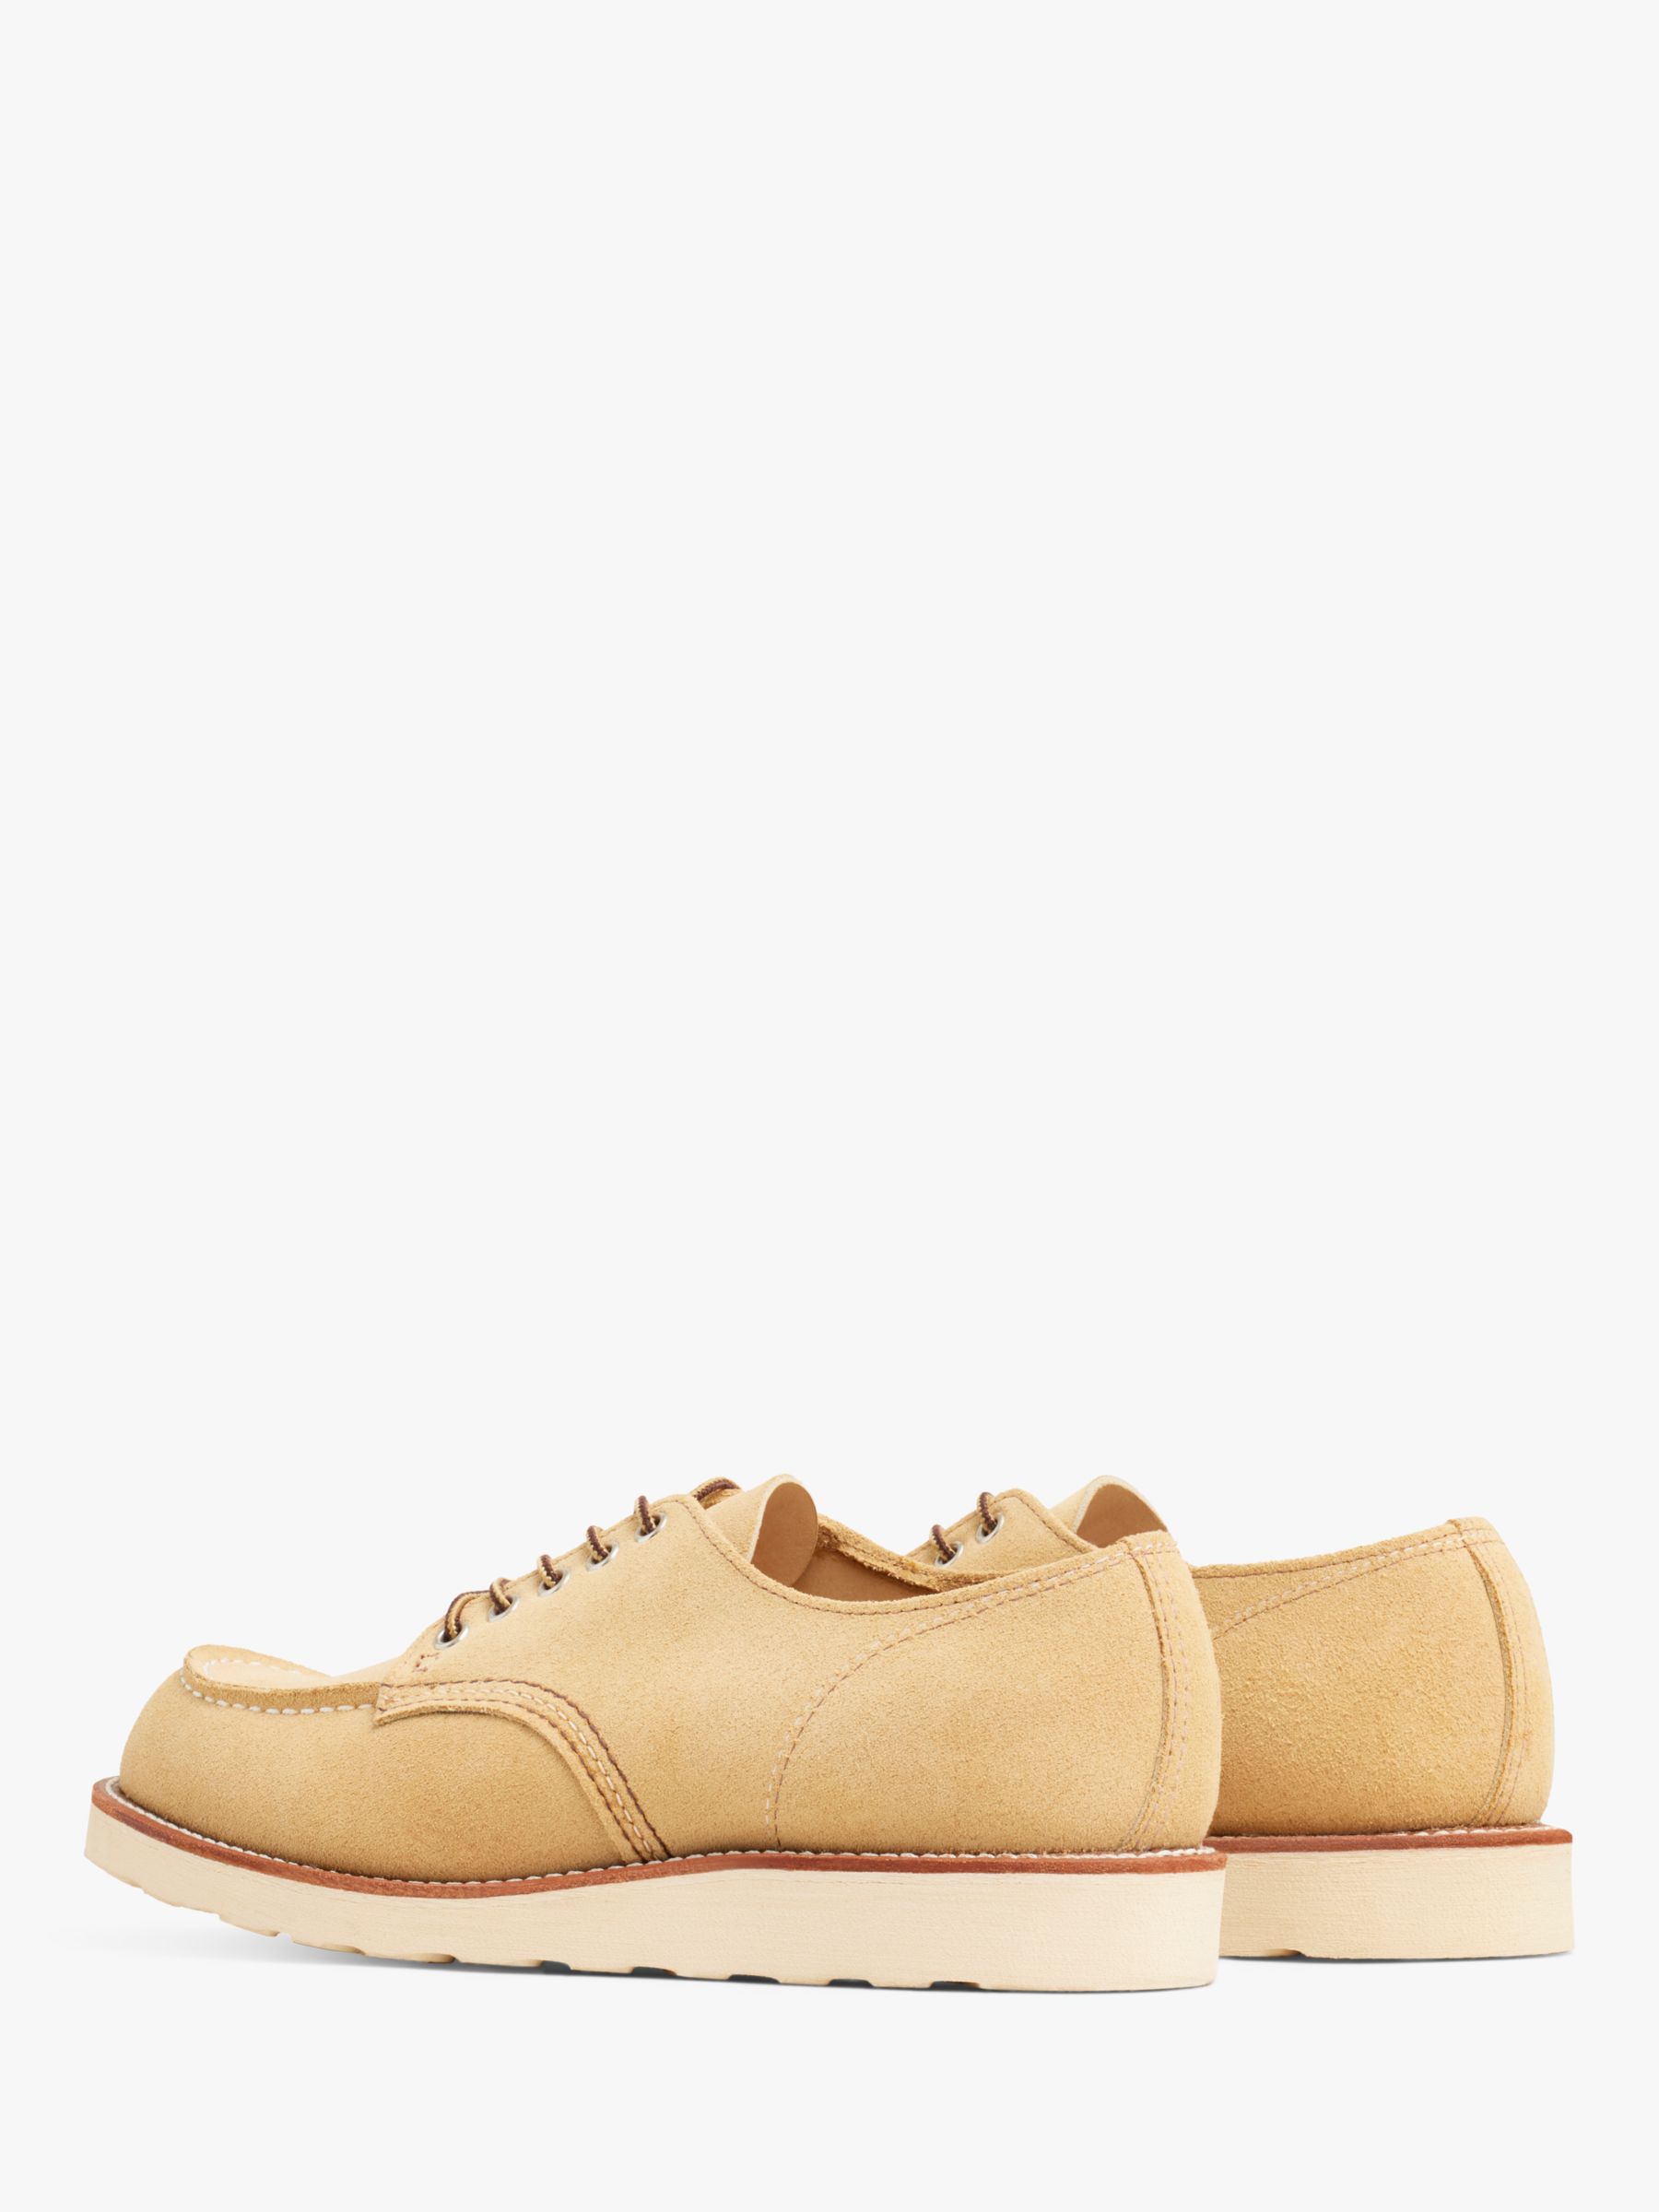 Buy Red Wing Heritage Work Classic Oxford Shoe Online at johnlewis.com